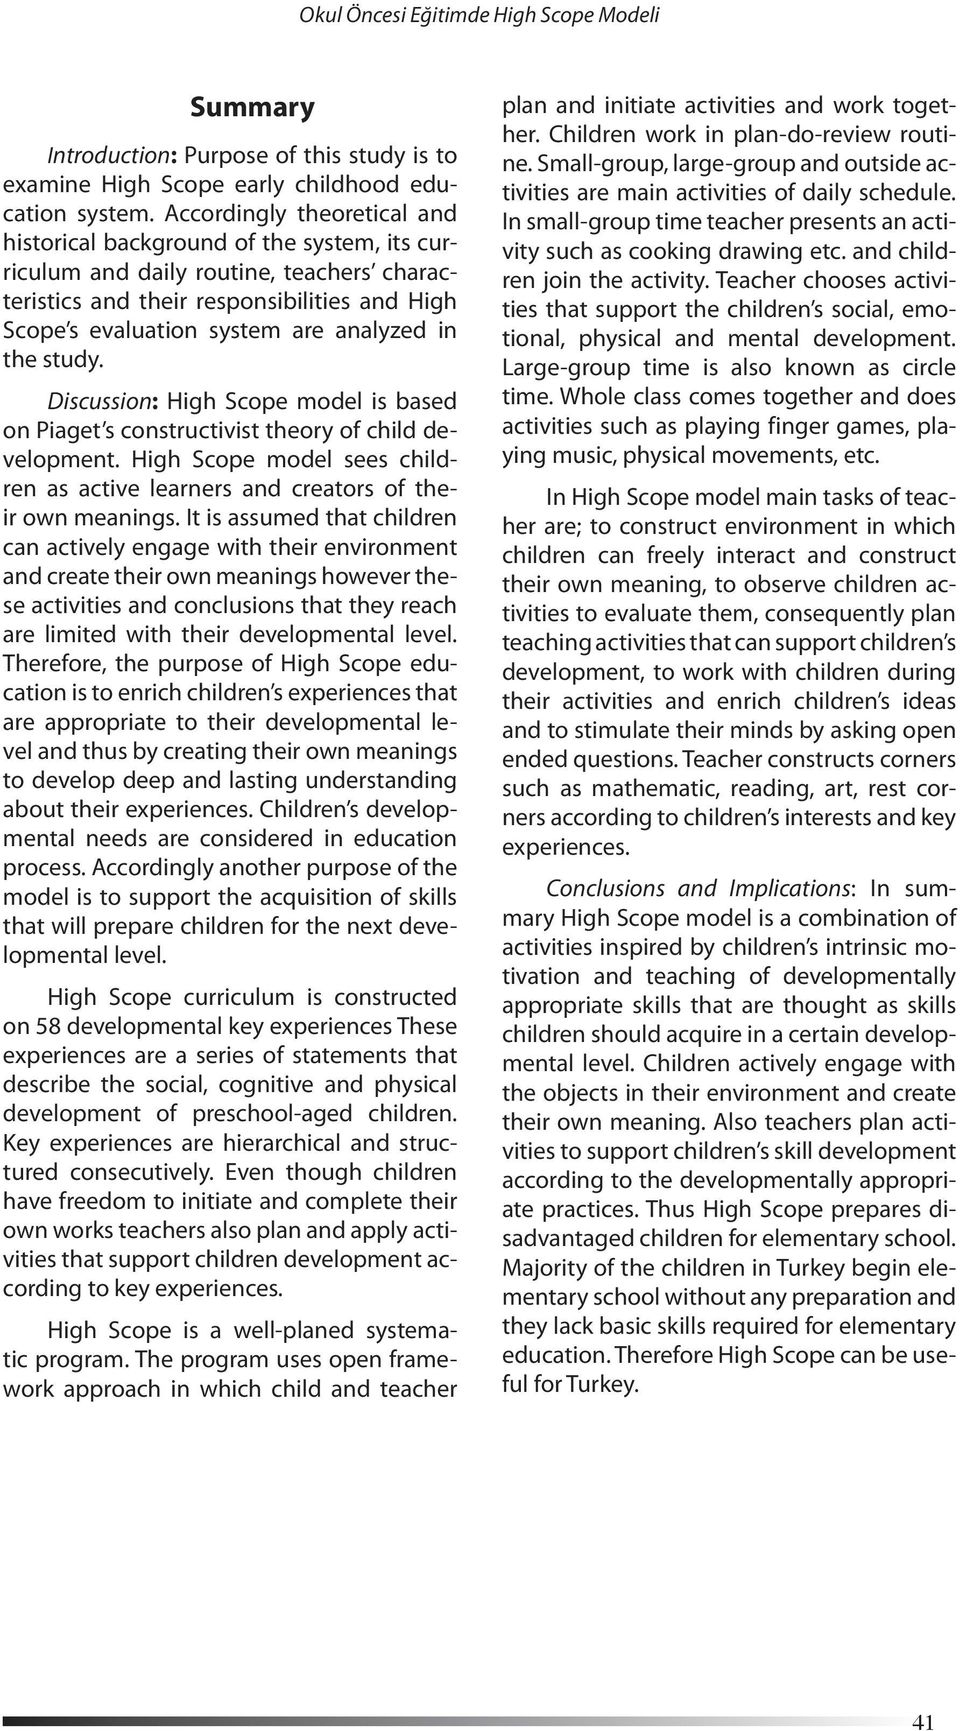 in the study. Discussion: High Scope model is based on Piaget s constructivist theory of child development. High Scope model sees children as active learners and creators of their own meanings.